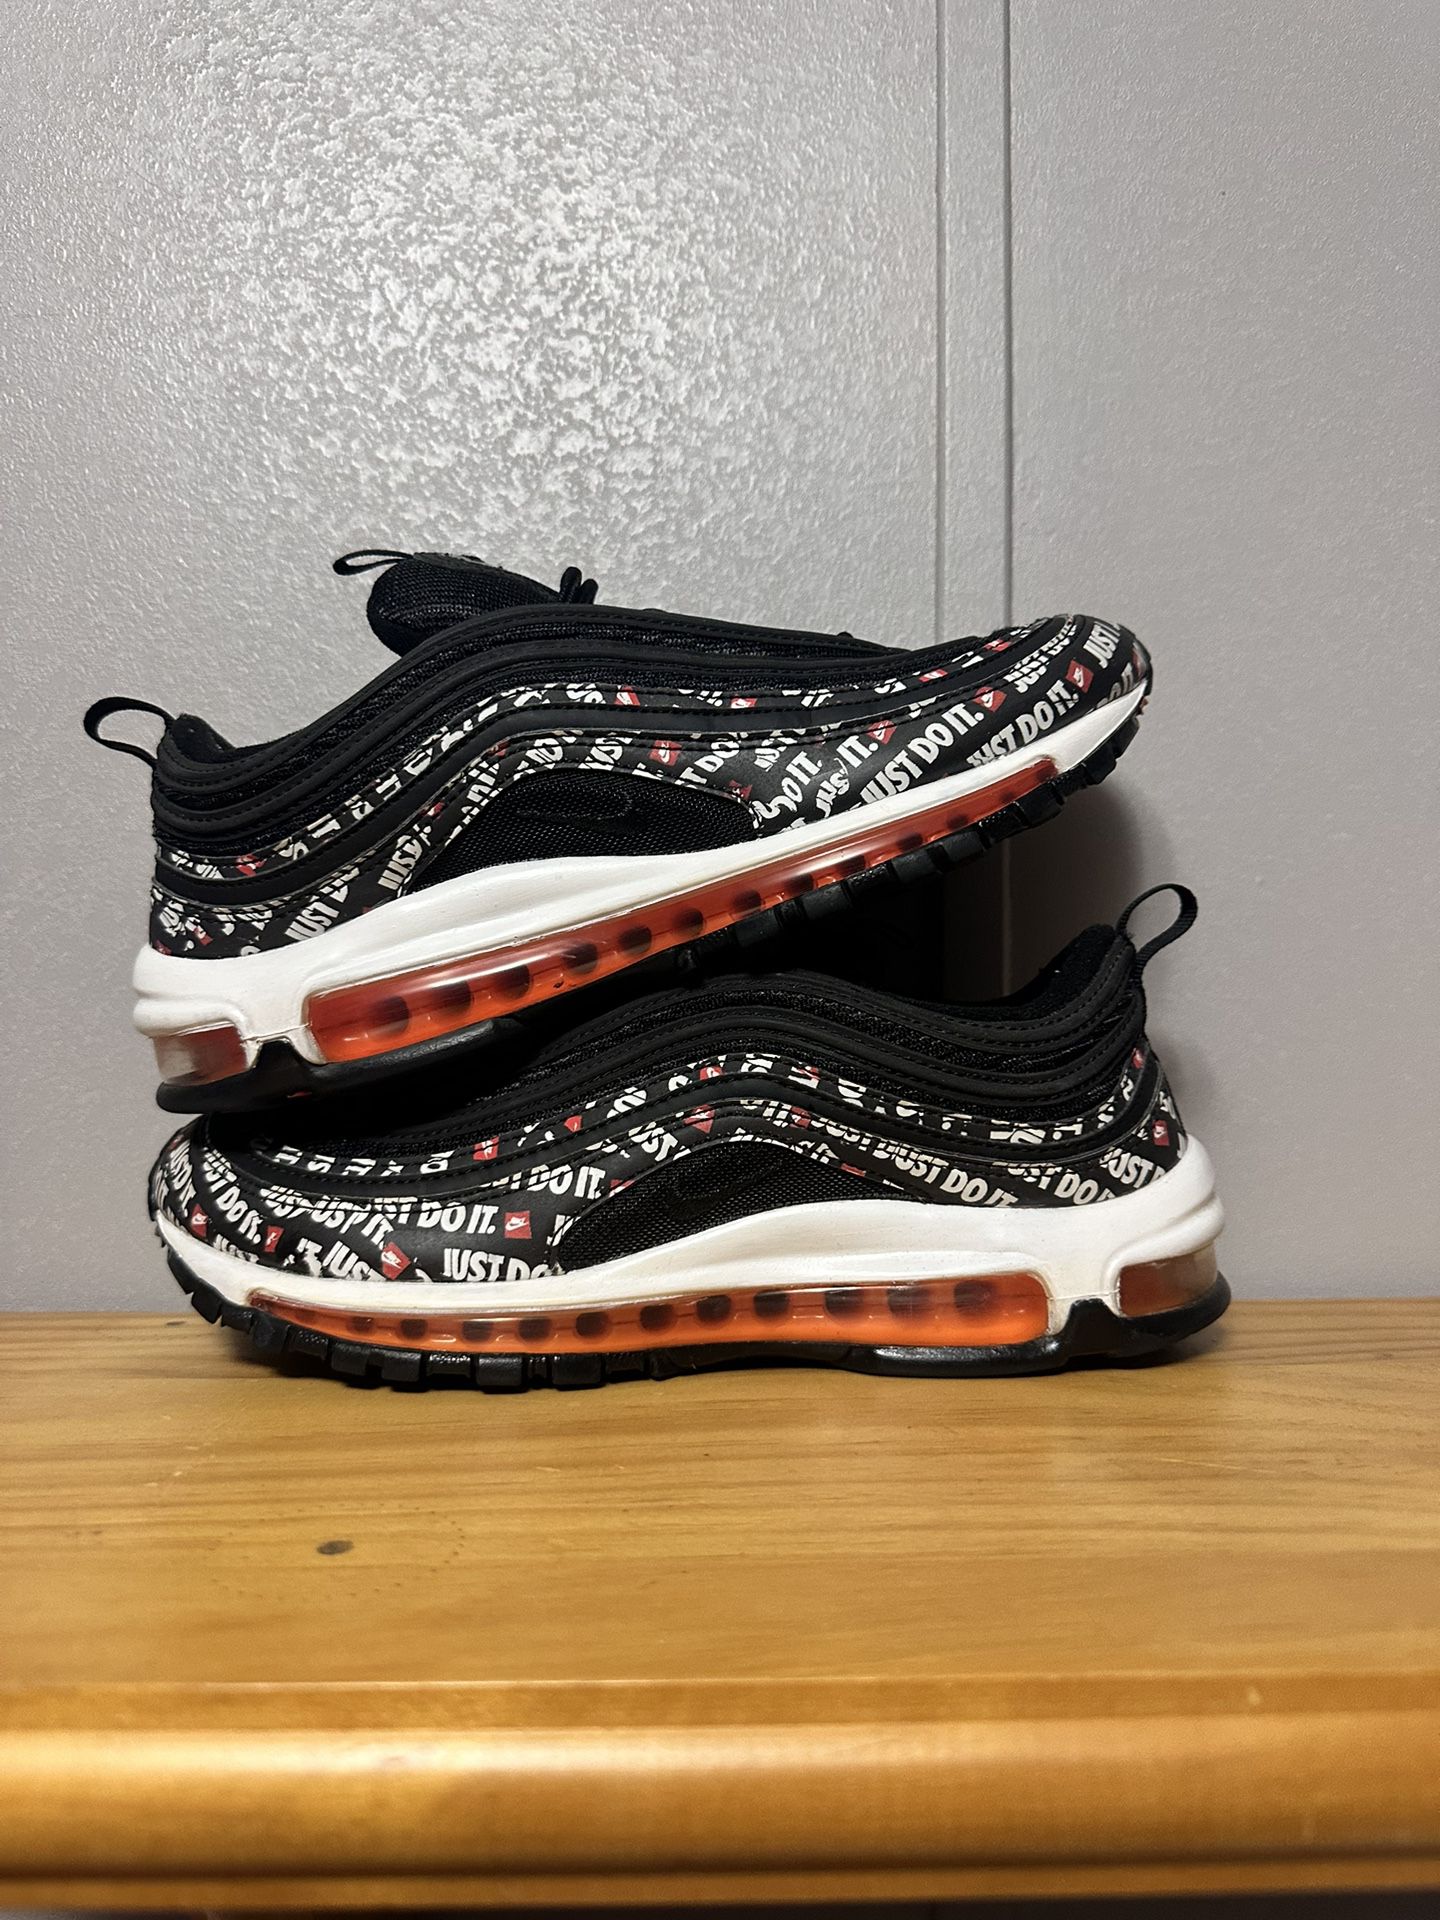 Nike Air Max 97 “Just Do It Pack Black”